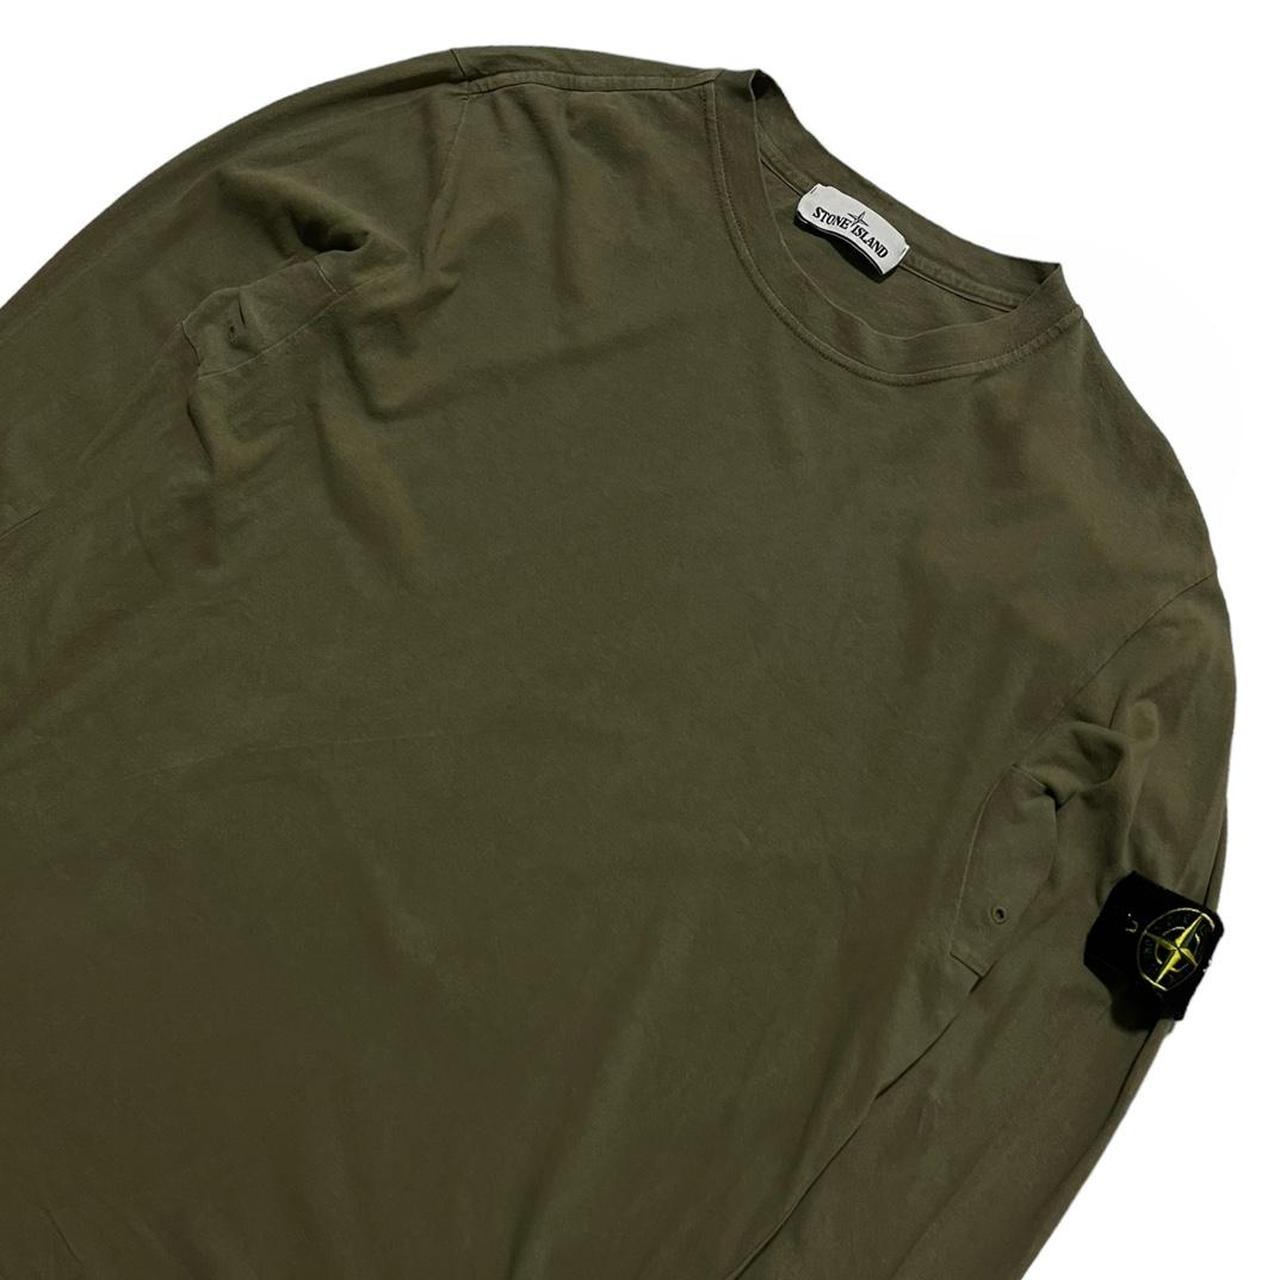 Stone island Olive green long sleeve top - Known Source